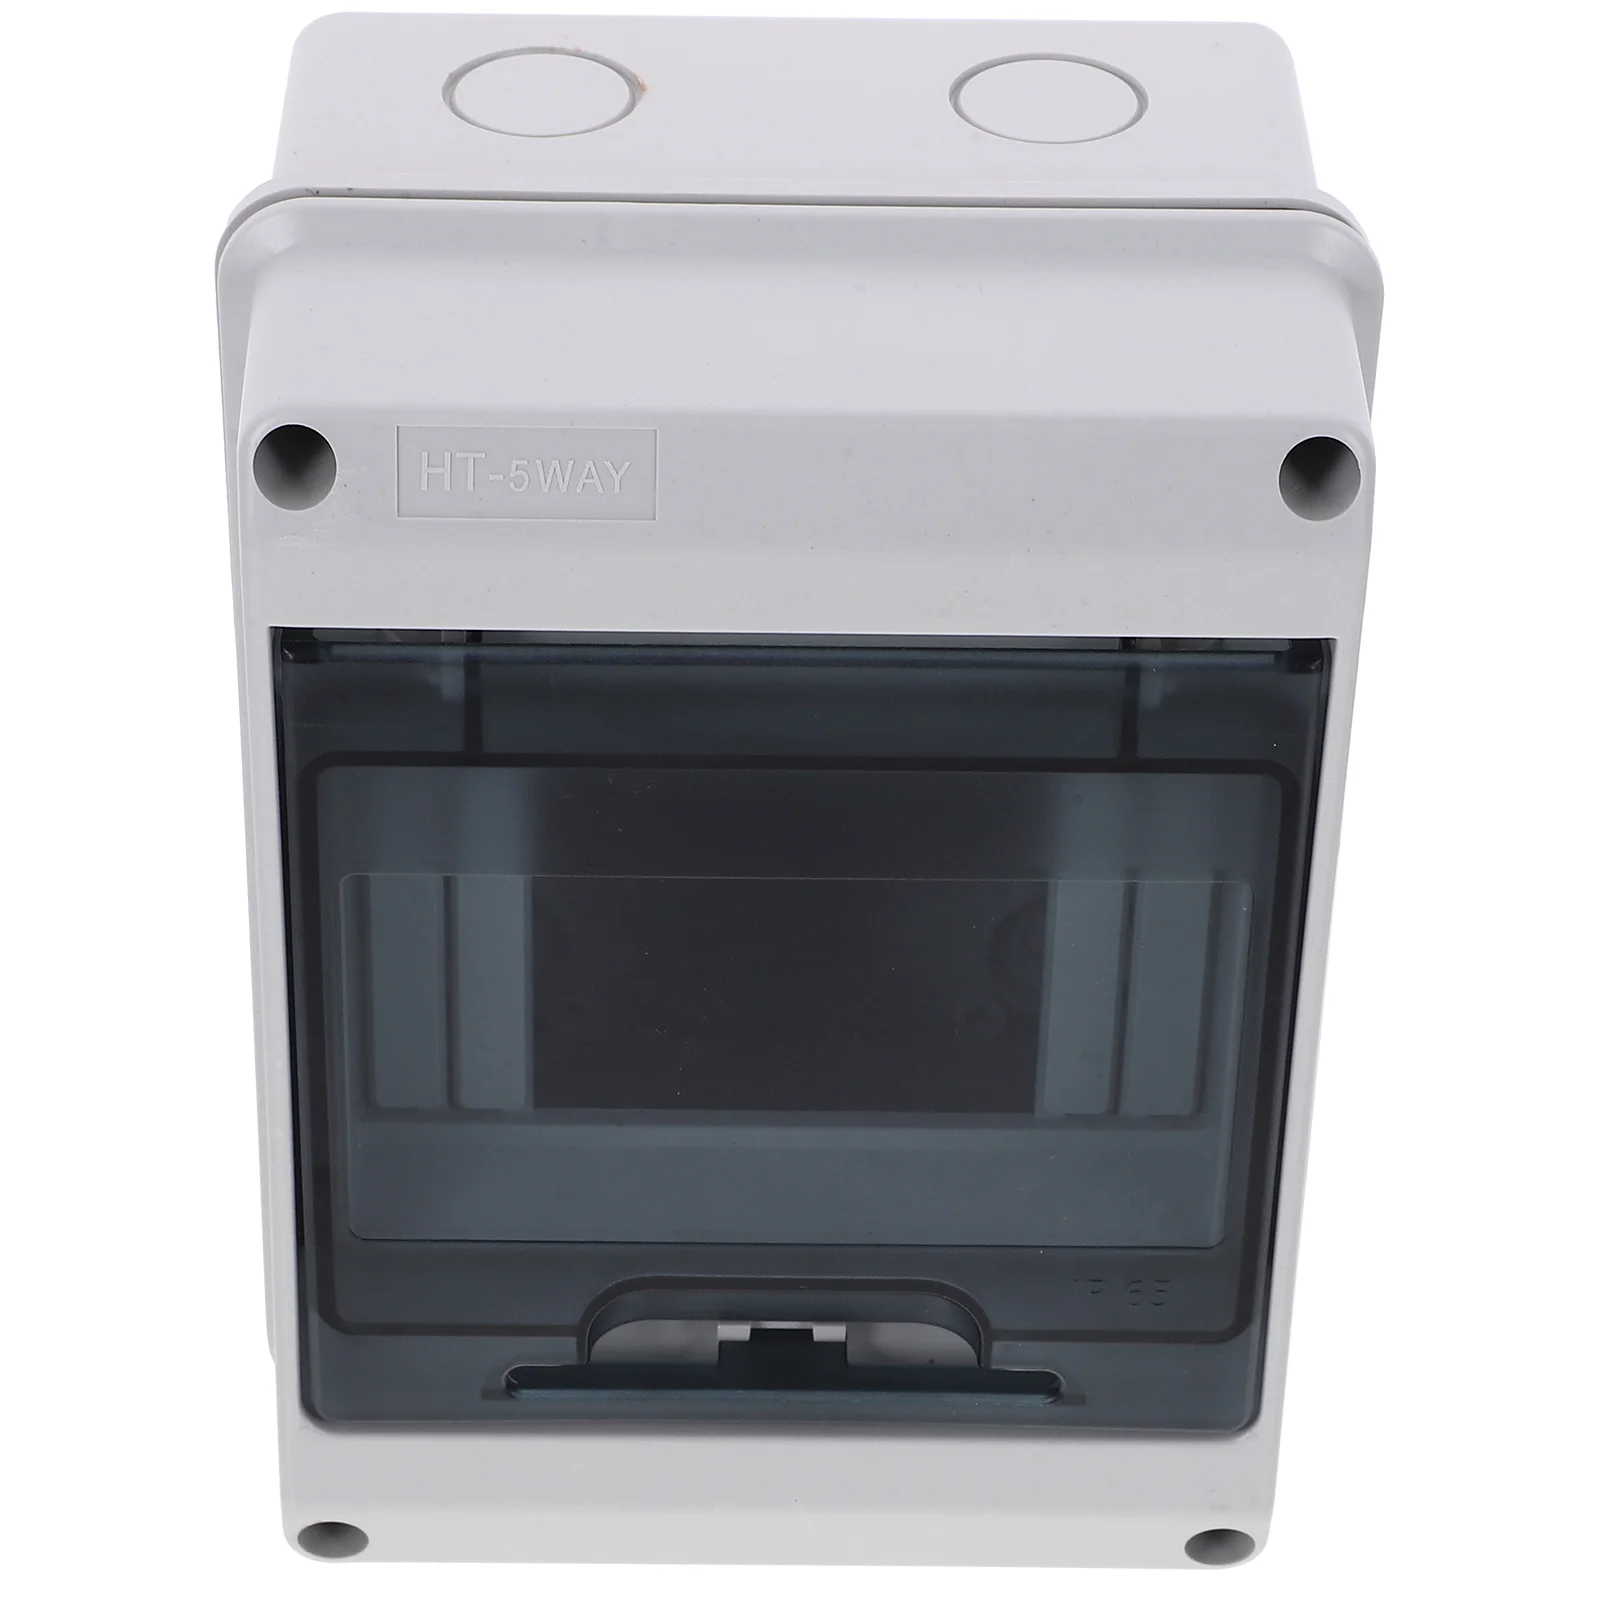 

Plastic Circuit Breaker Distribution Box 5-Way Clear Lid Power Distribution Protections Box IP65 Waterproof Outdoor Electrical